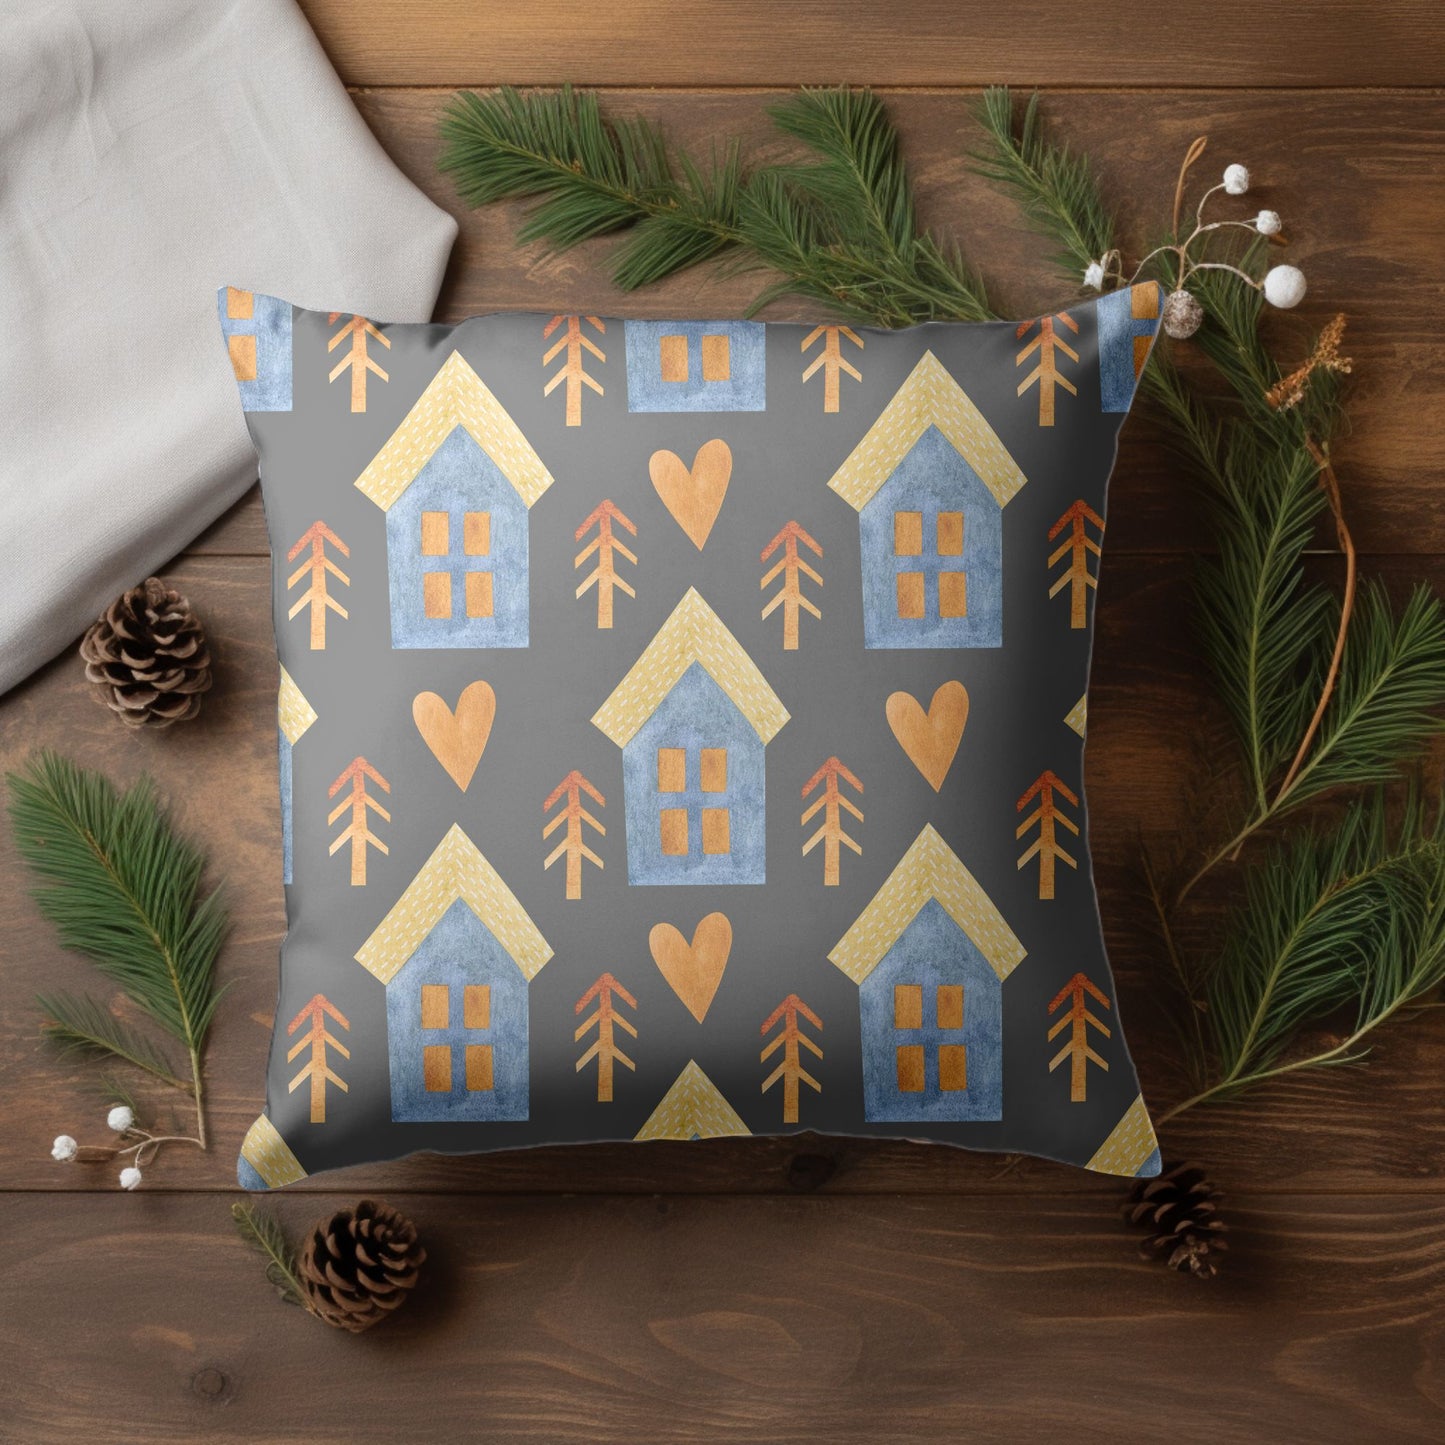 Detail of the Christmas Home Design on the Festive Pillow